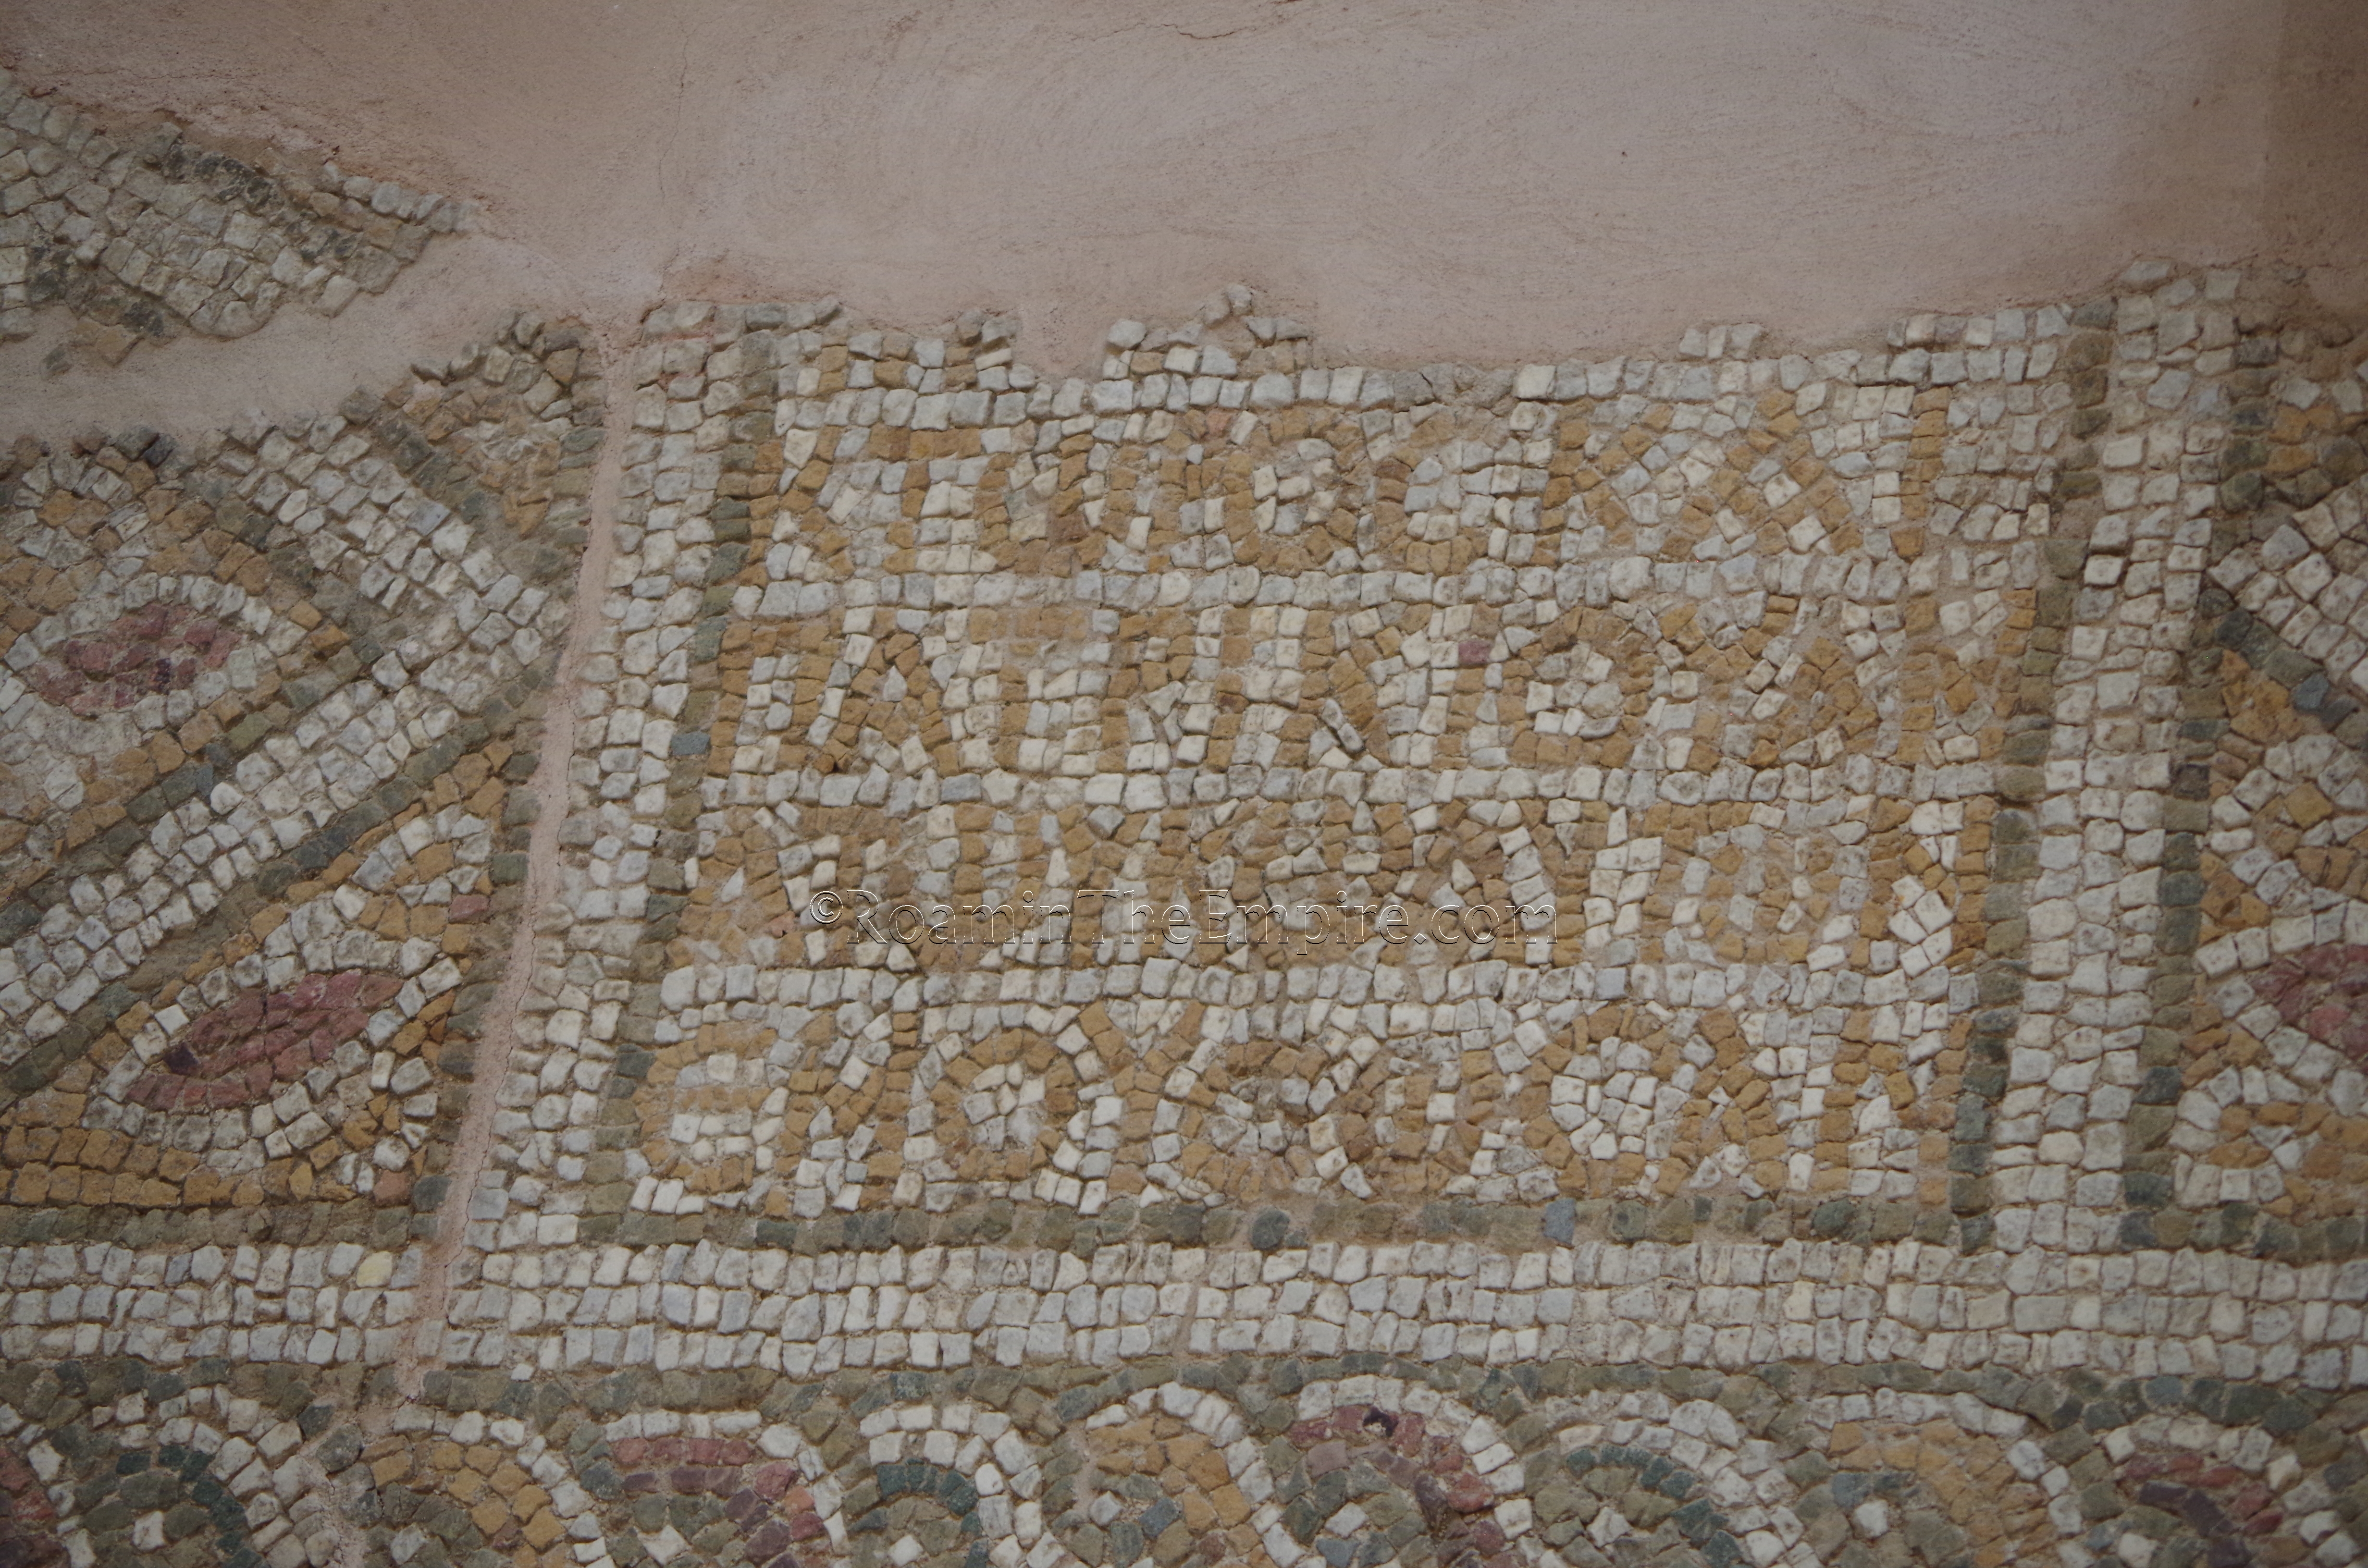 Mosaic inscription of Basiliscus in the Small Basilica.